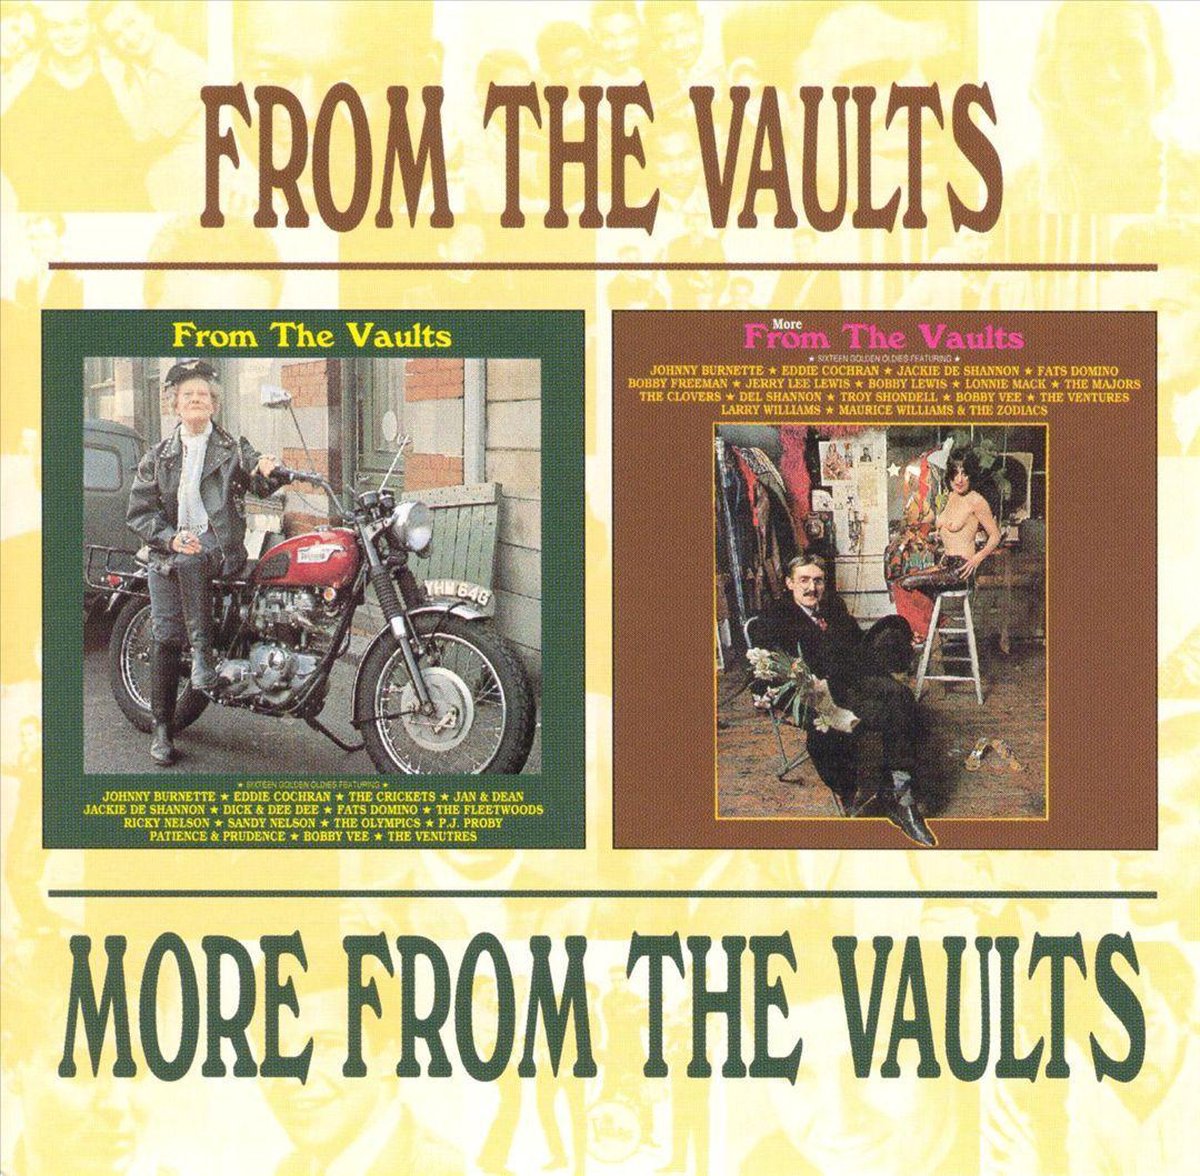 From The Vaults/More From The Vaults - various artists